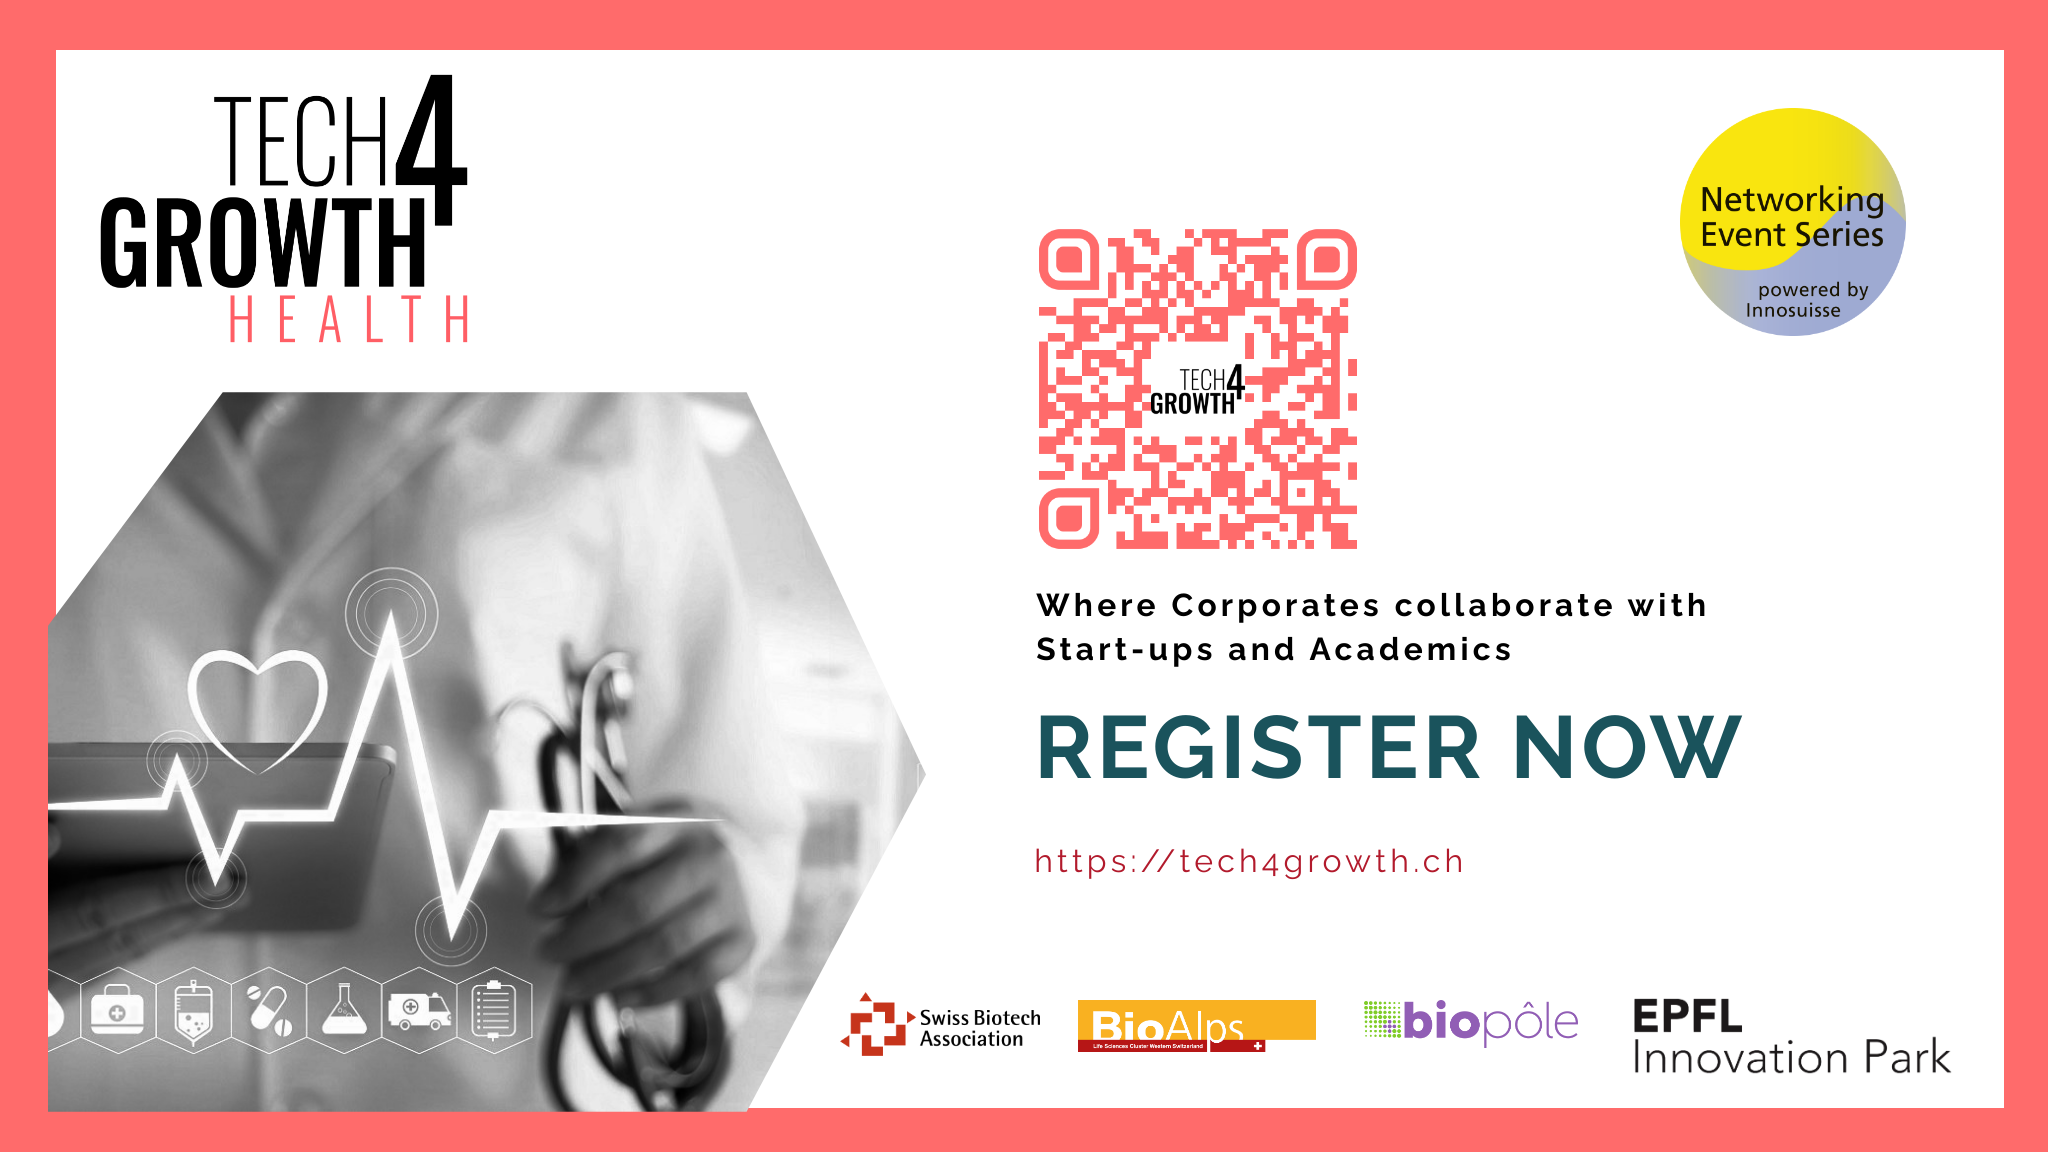 Tech4Growth_Networking Event Series_with Innosuisse